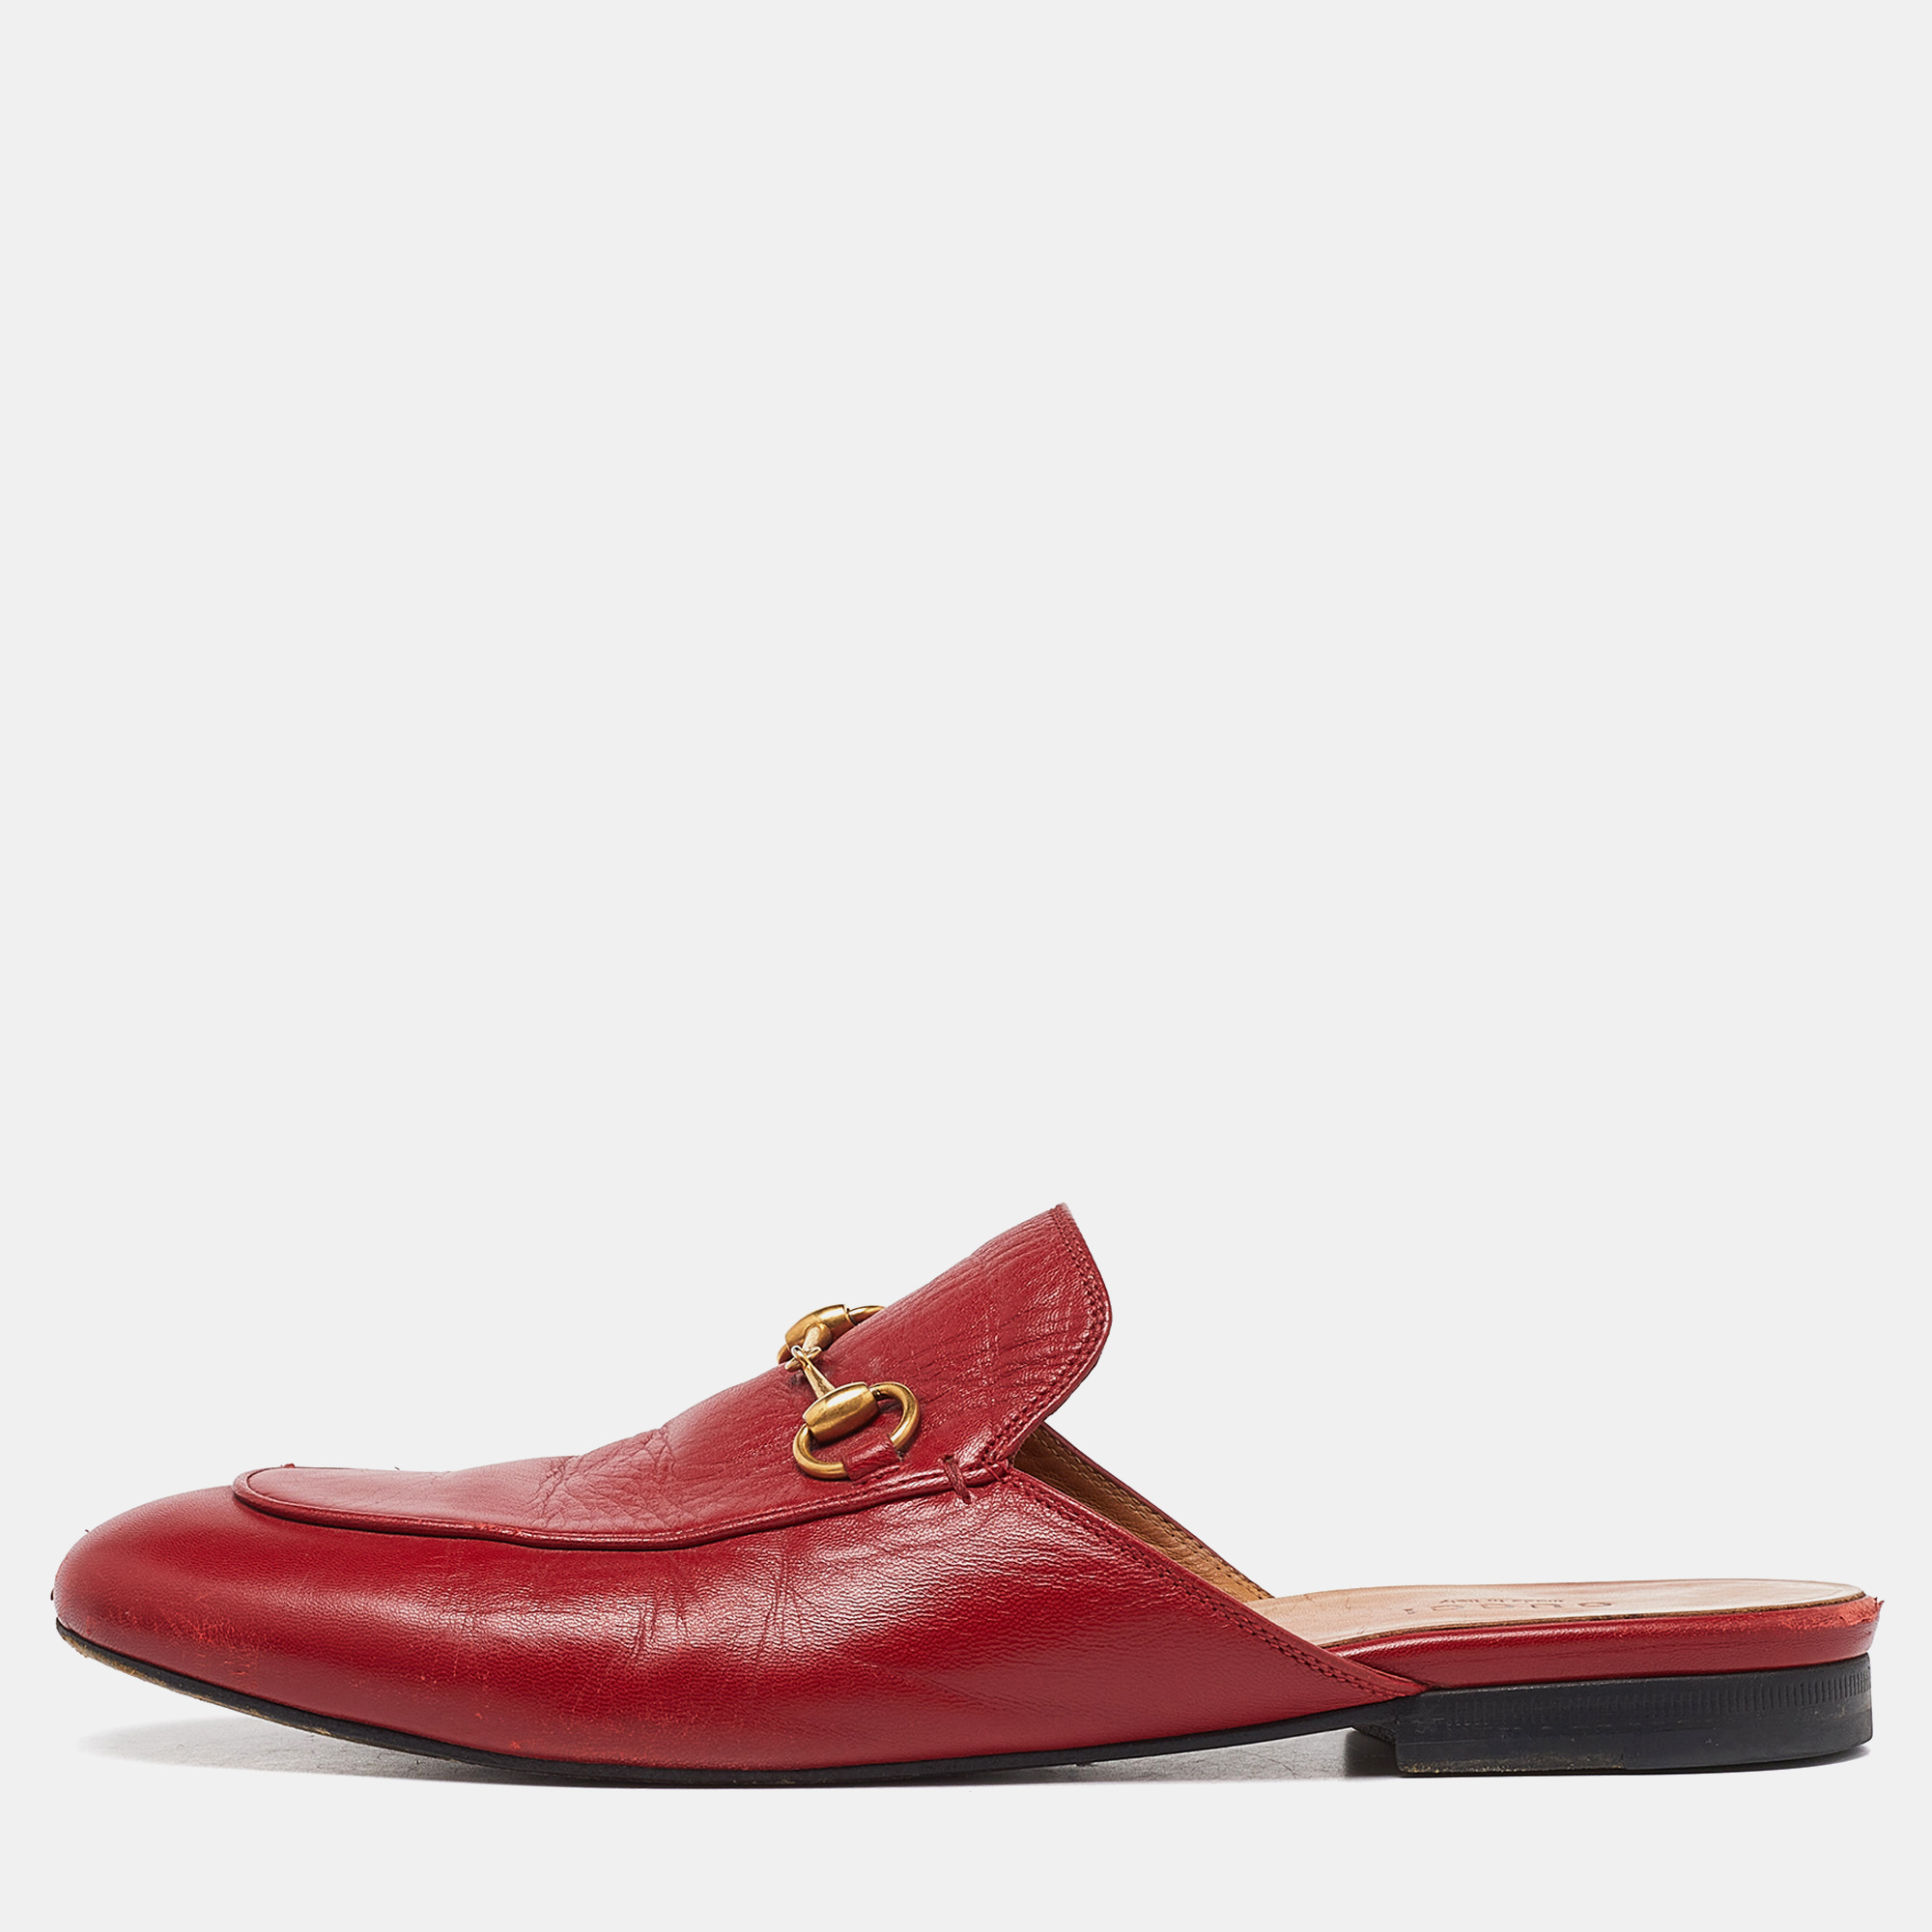 Gucci red leather princetown horsebit flat mules size 39